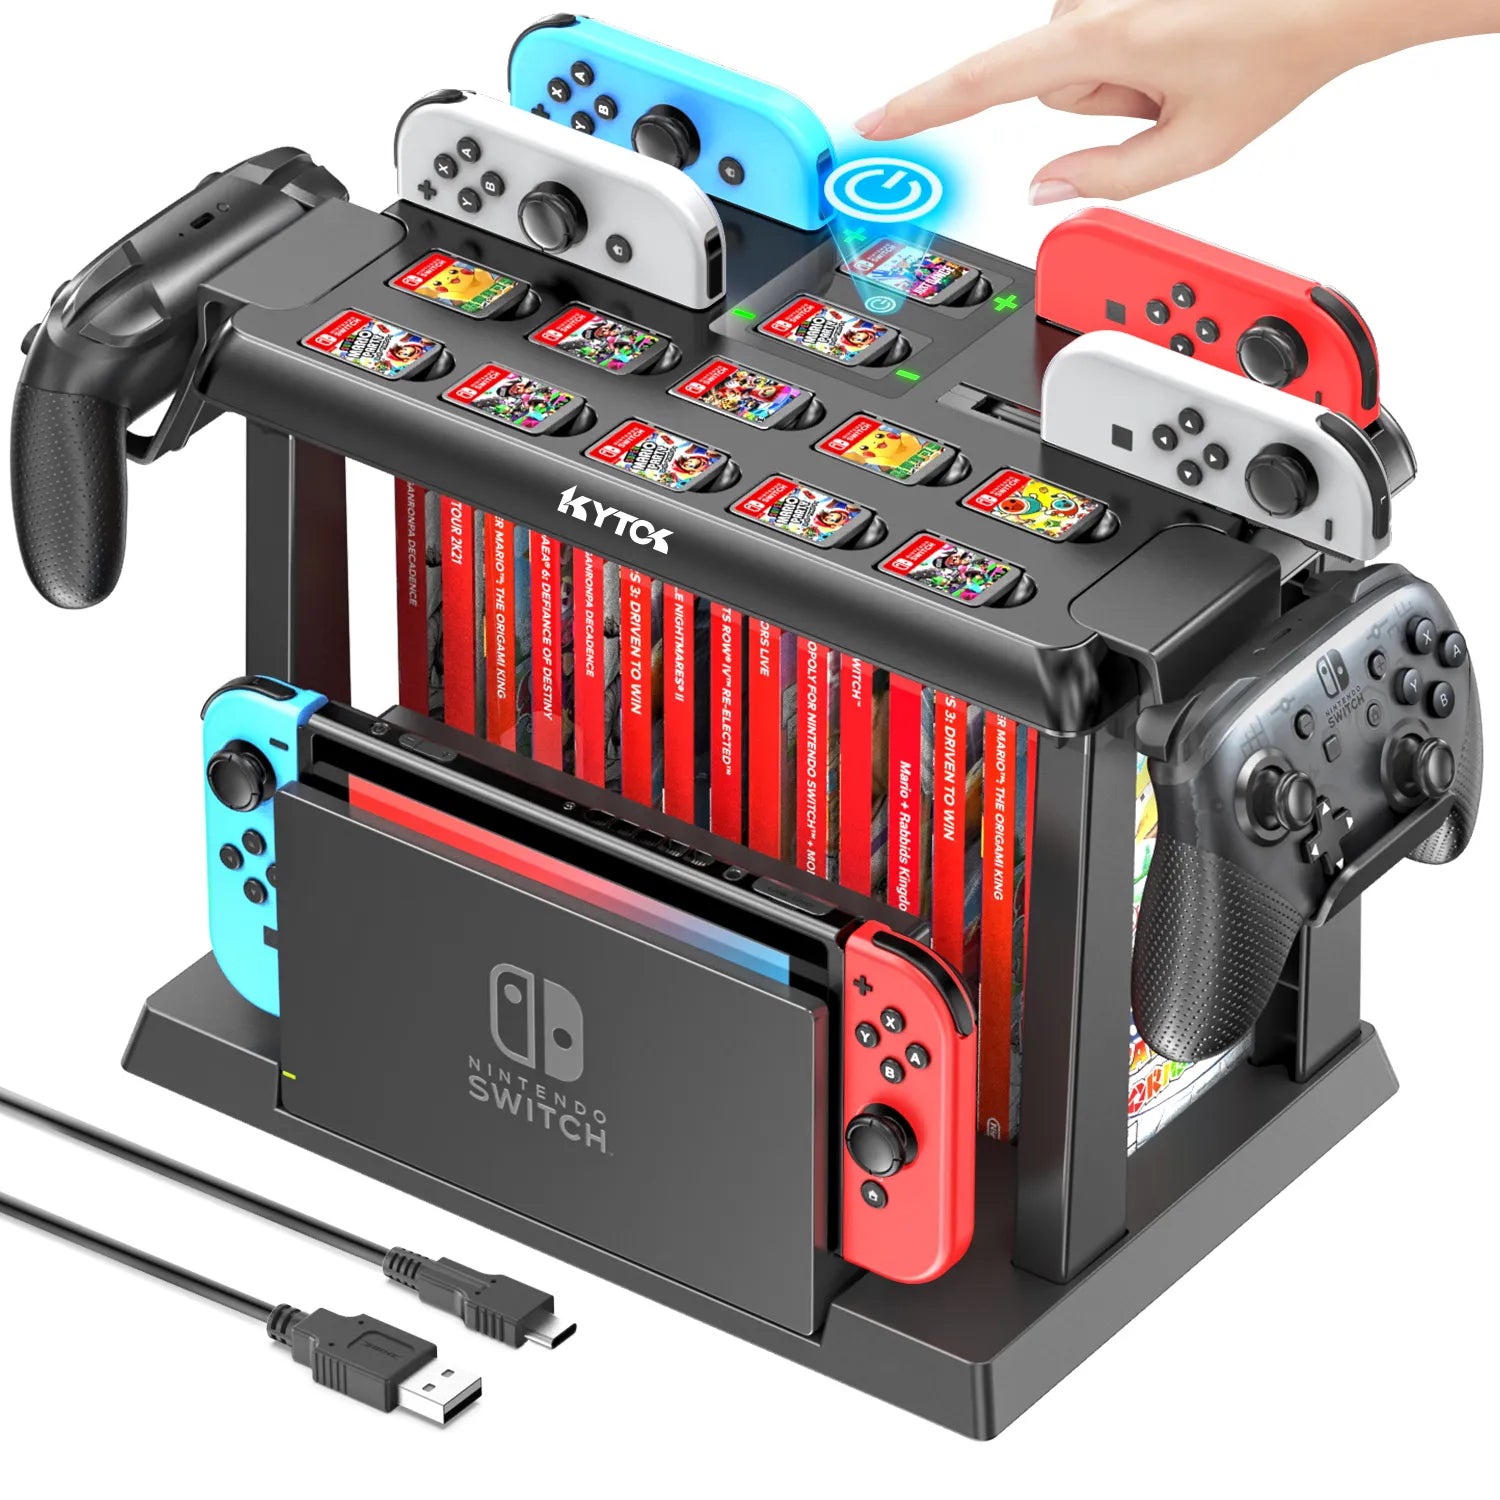 Nintendo Switch OLED Charger Stand